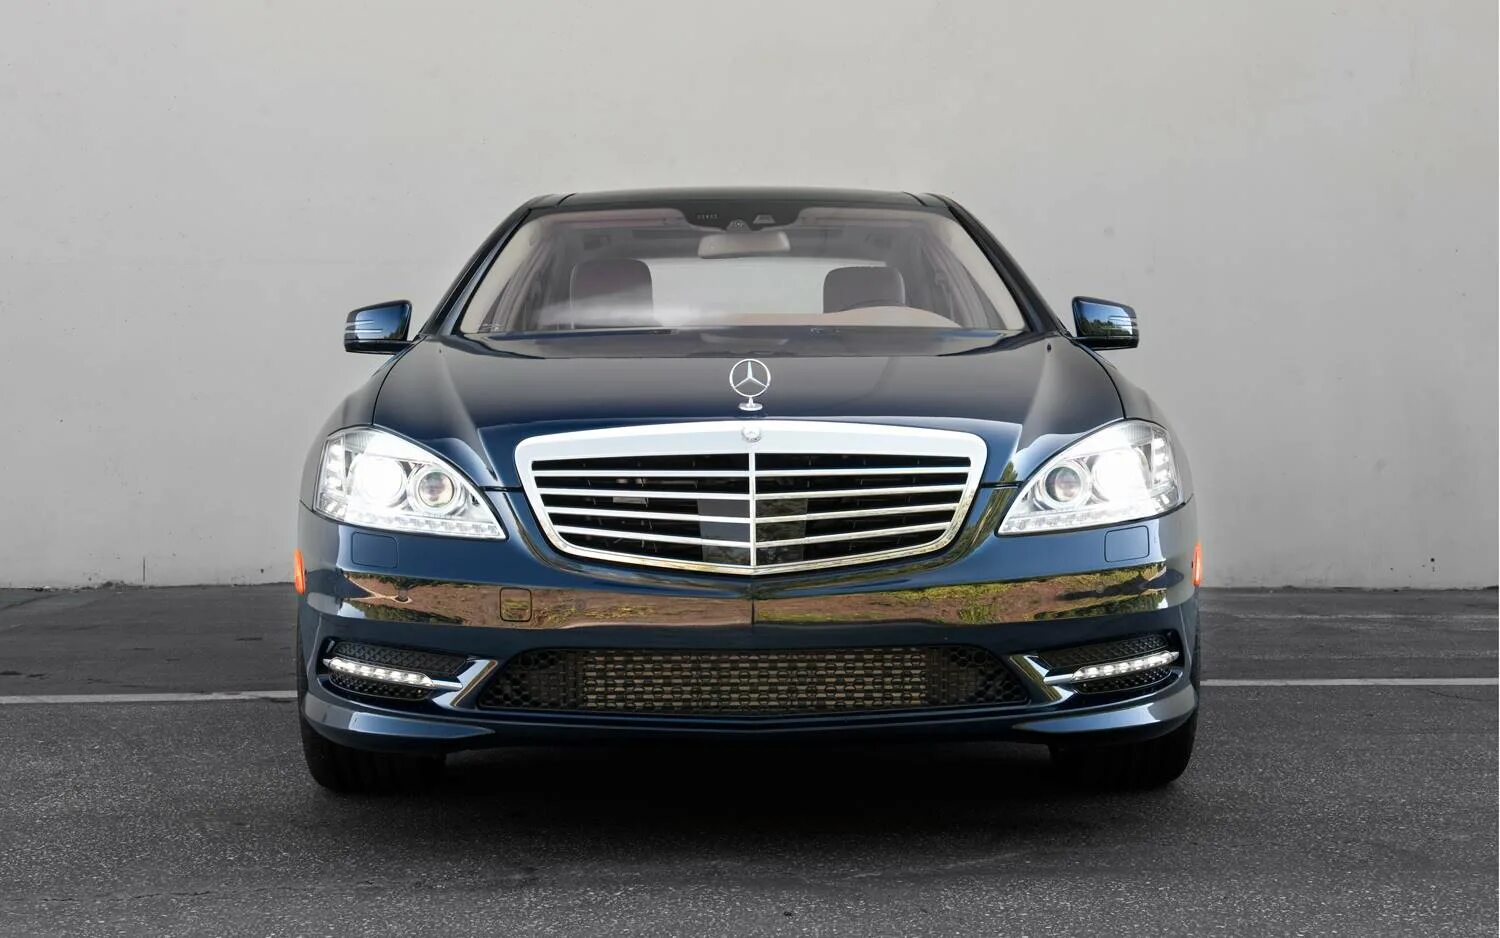 Мерседес s350 4matic. Mercedes Benz s350 BLUETEC. Мерседес-Бенц s350 BLUETEC 4matic. Mercedes-Benz s s350 4matic 2013.